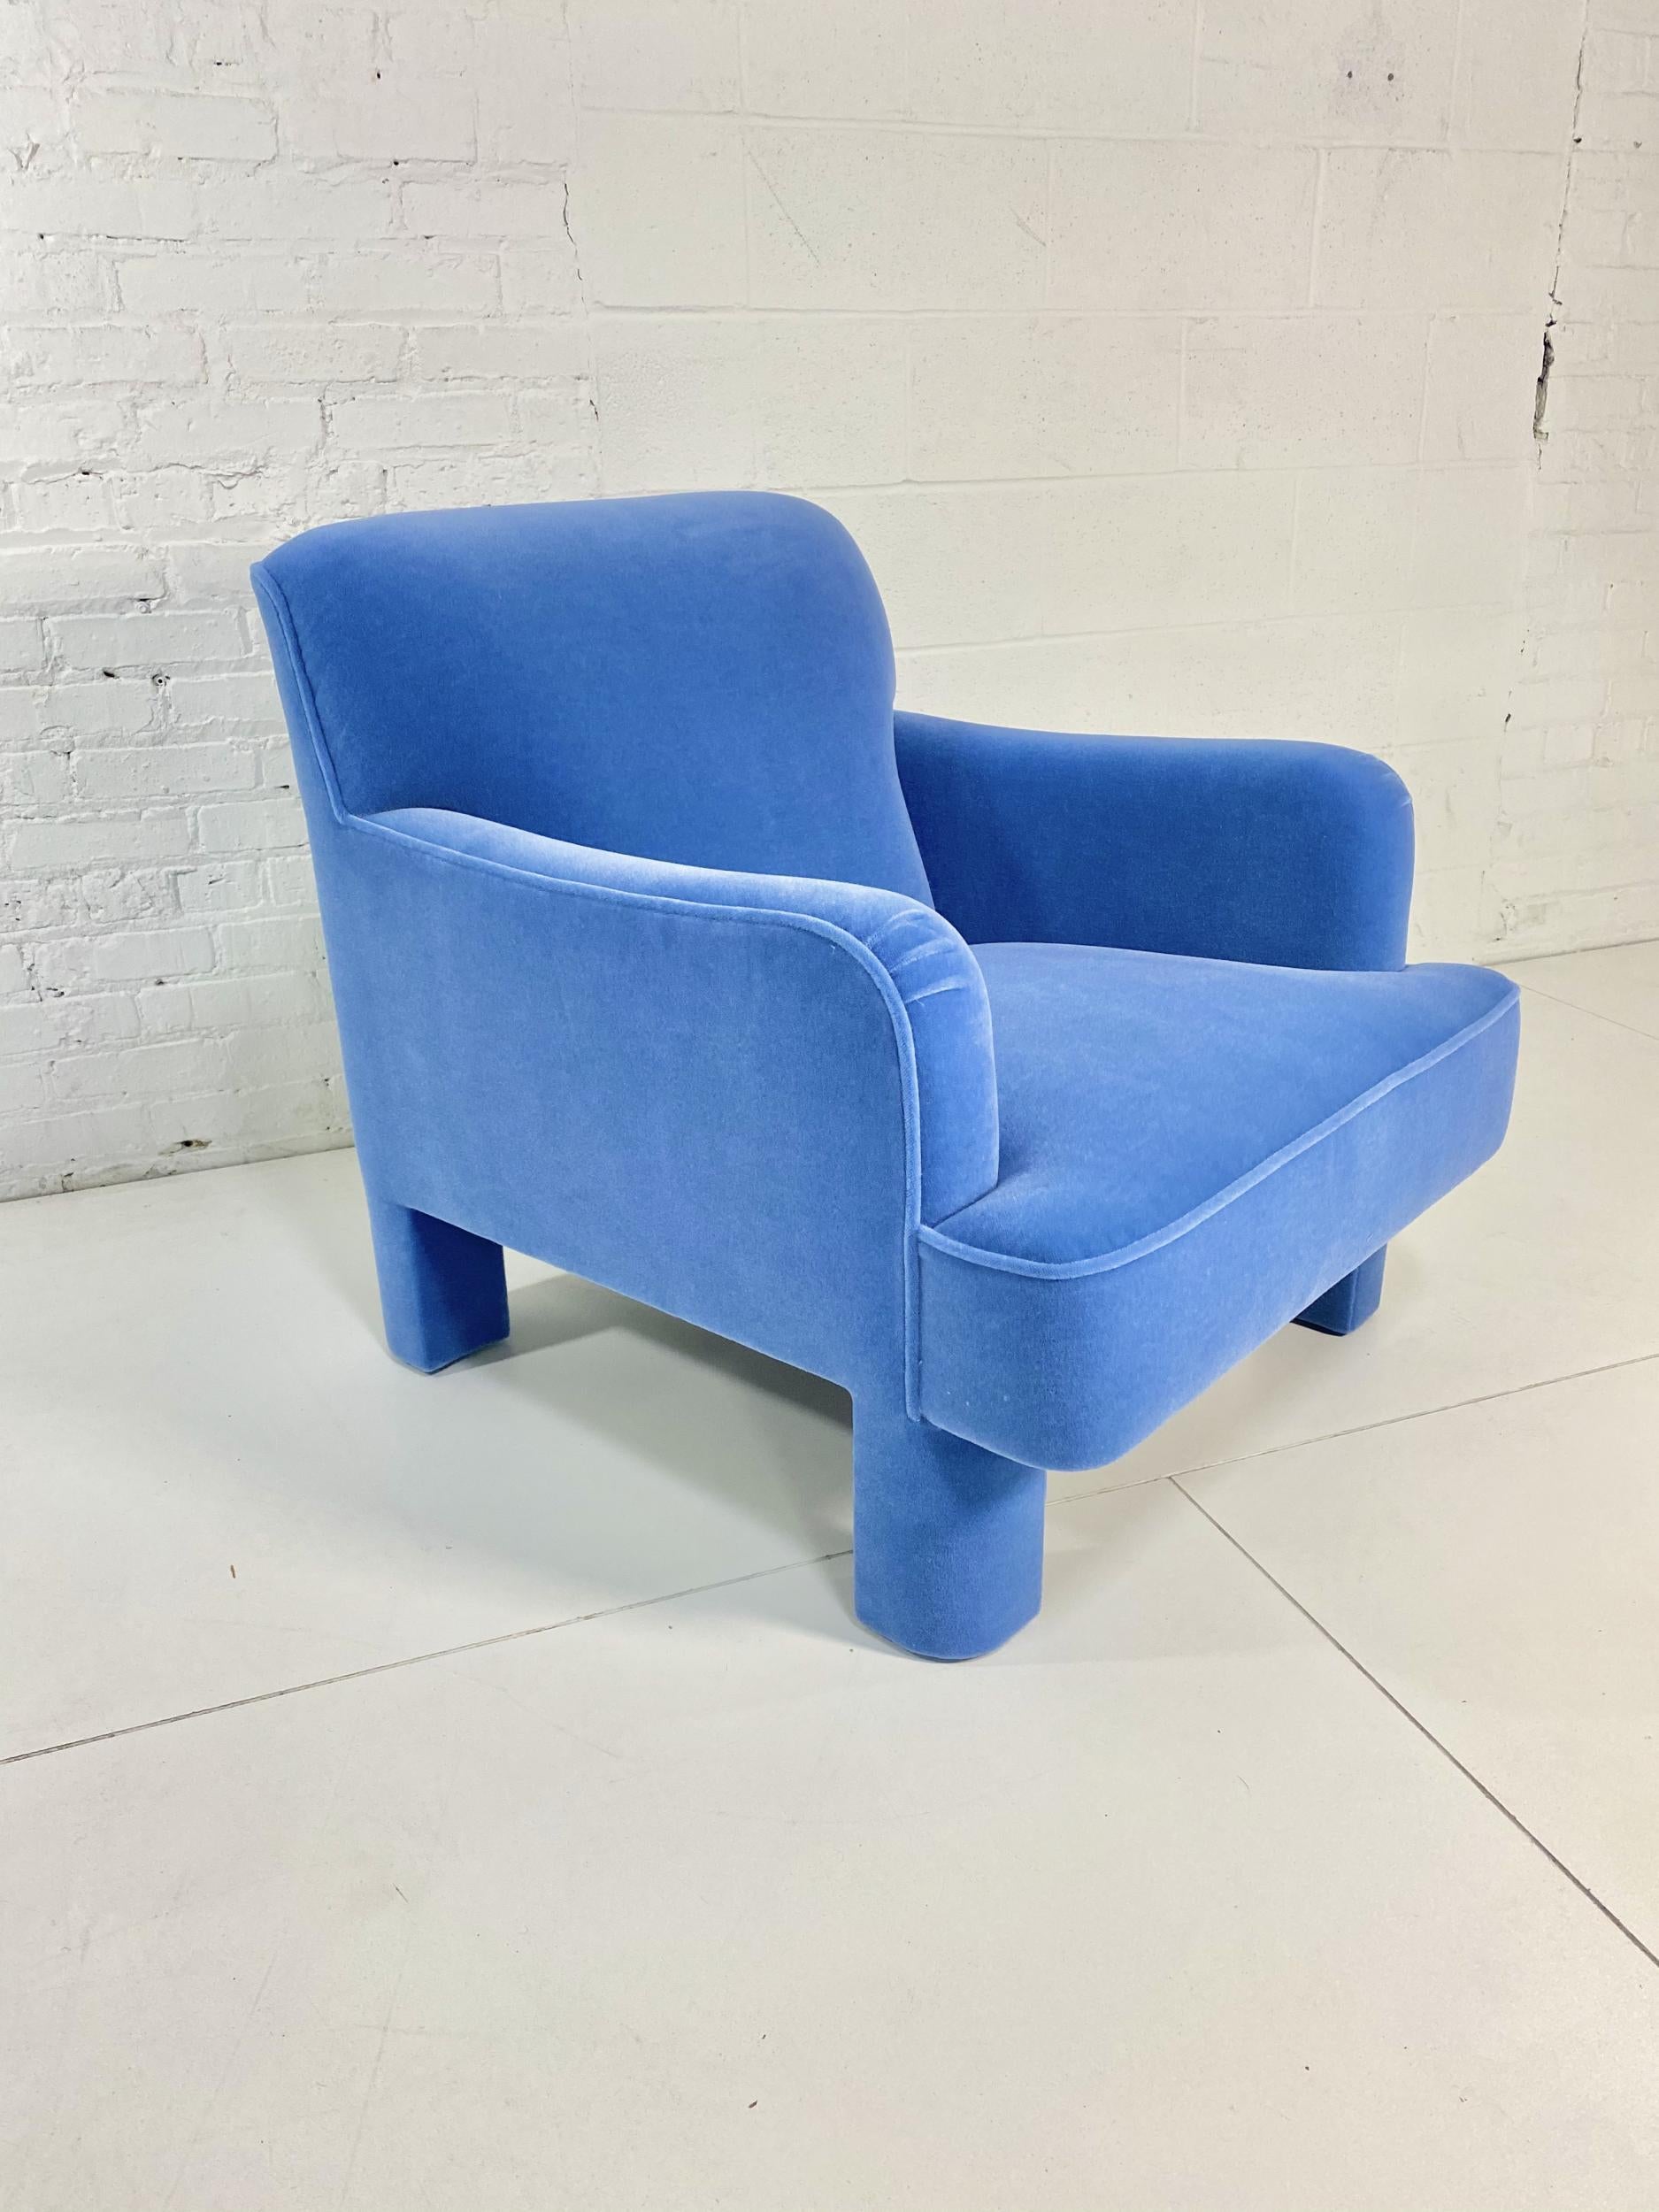 Postmodern lounge chair, circa 1980’s. Fully restored with perrywinkle Mohair.